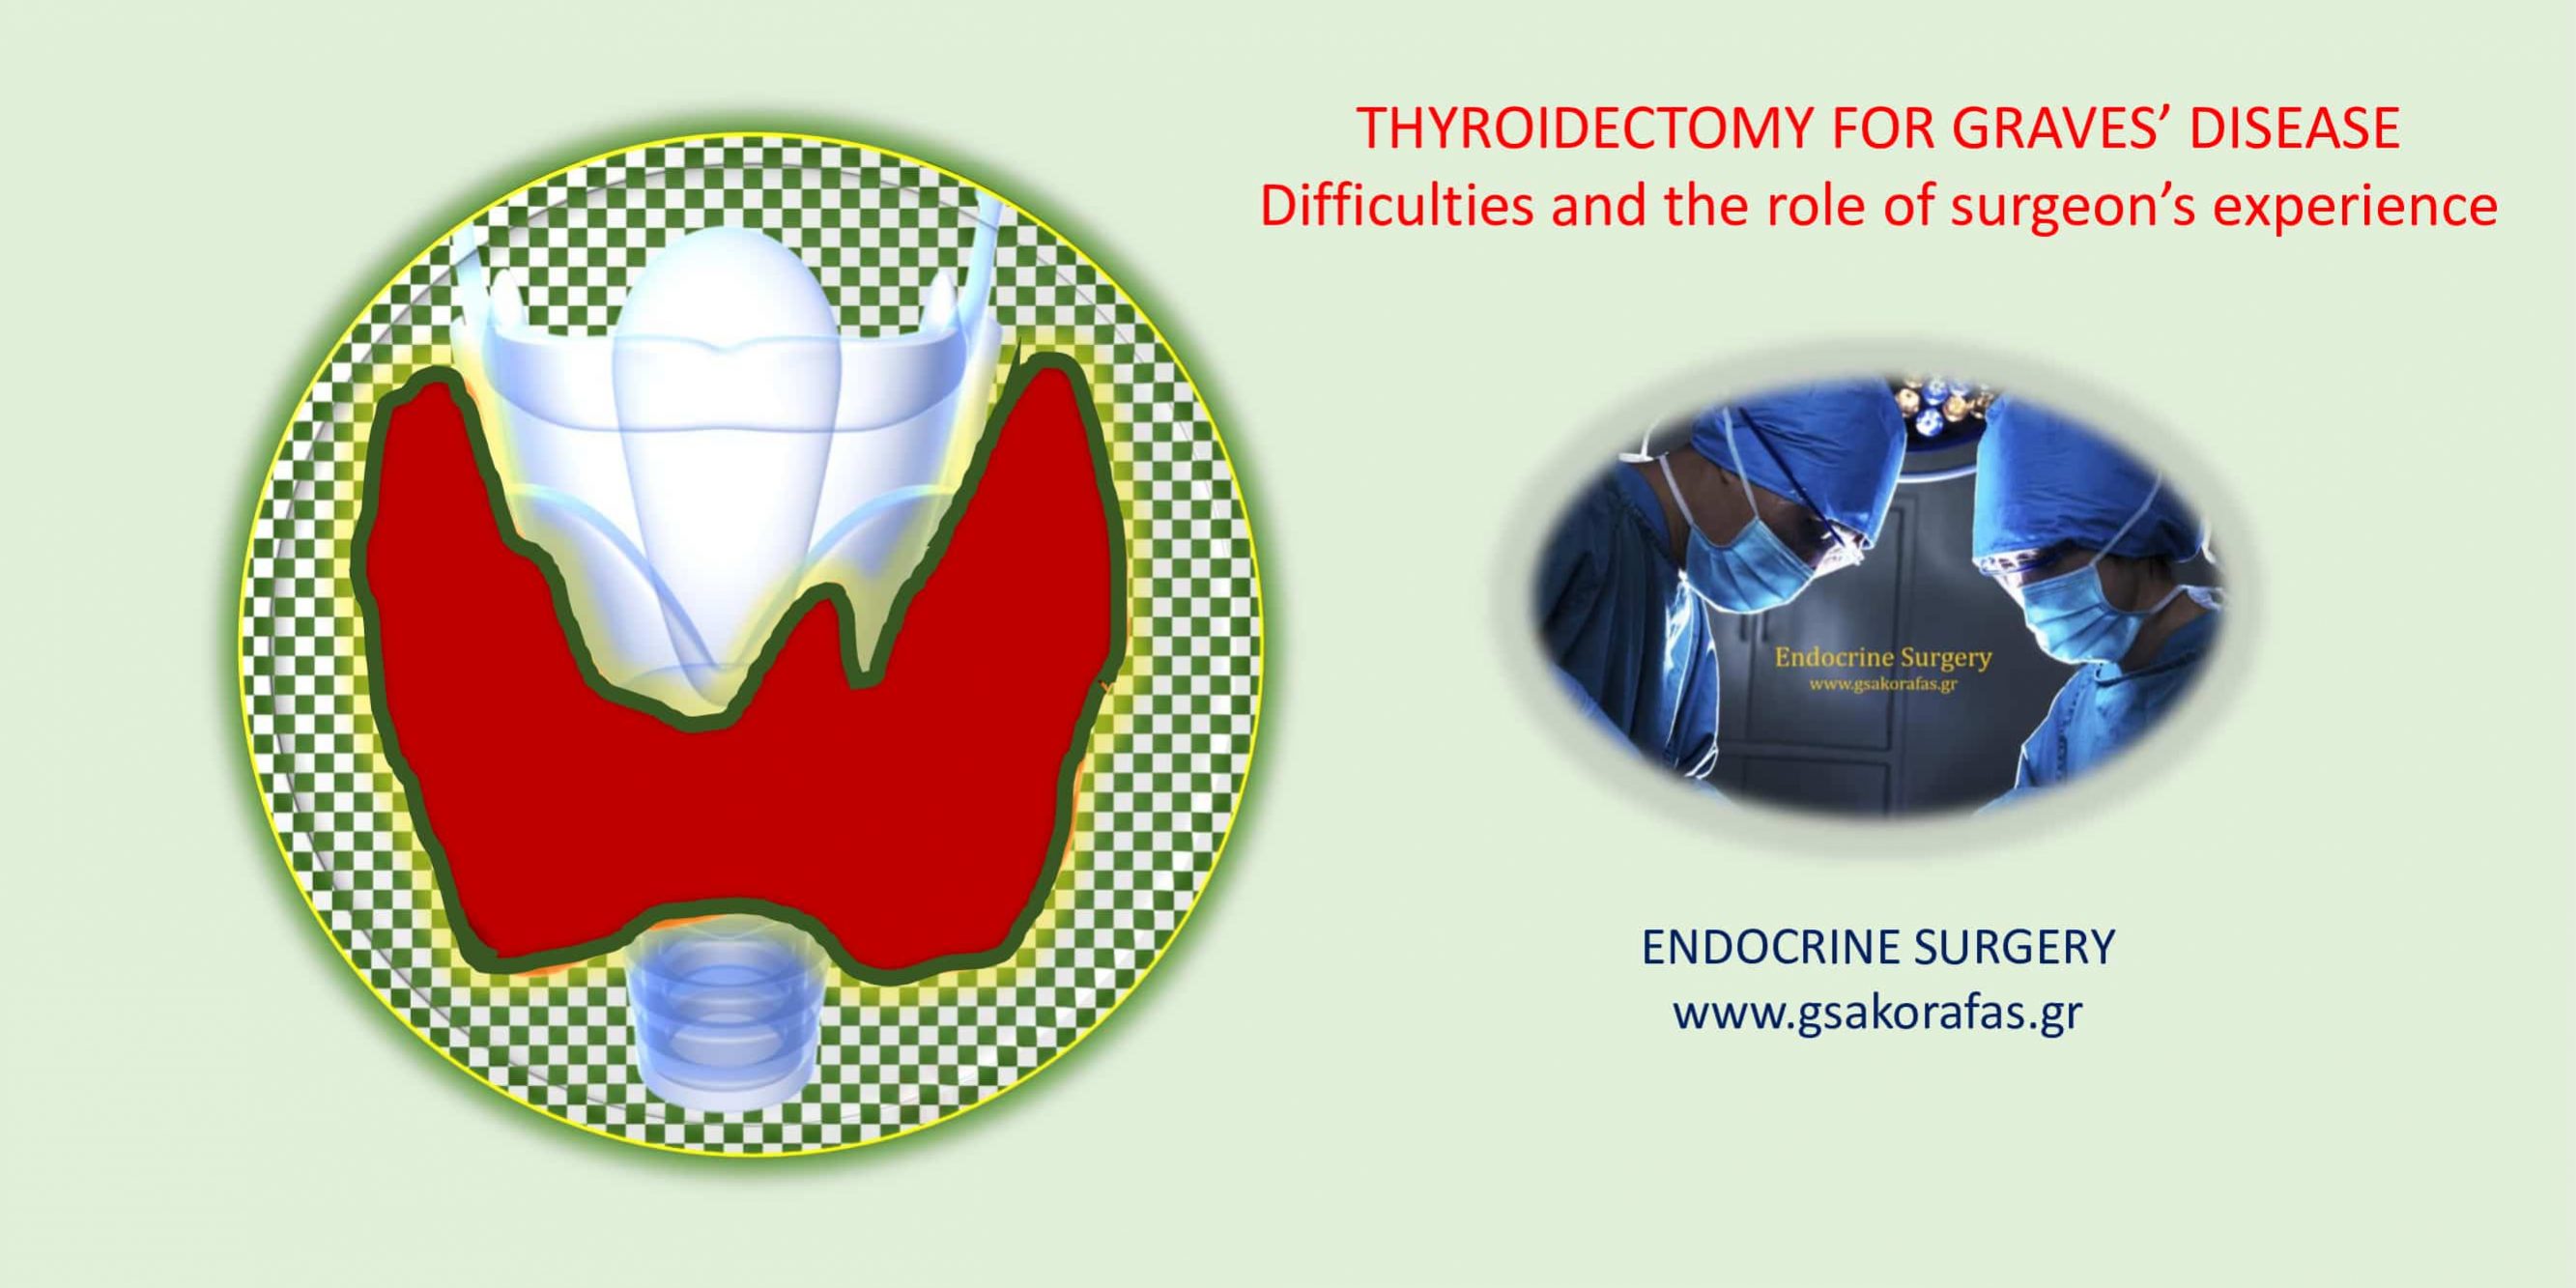 Thyroidectomy in patients with Graves disease - technical challenges and morbidity